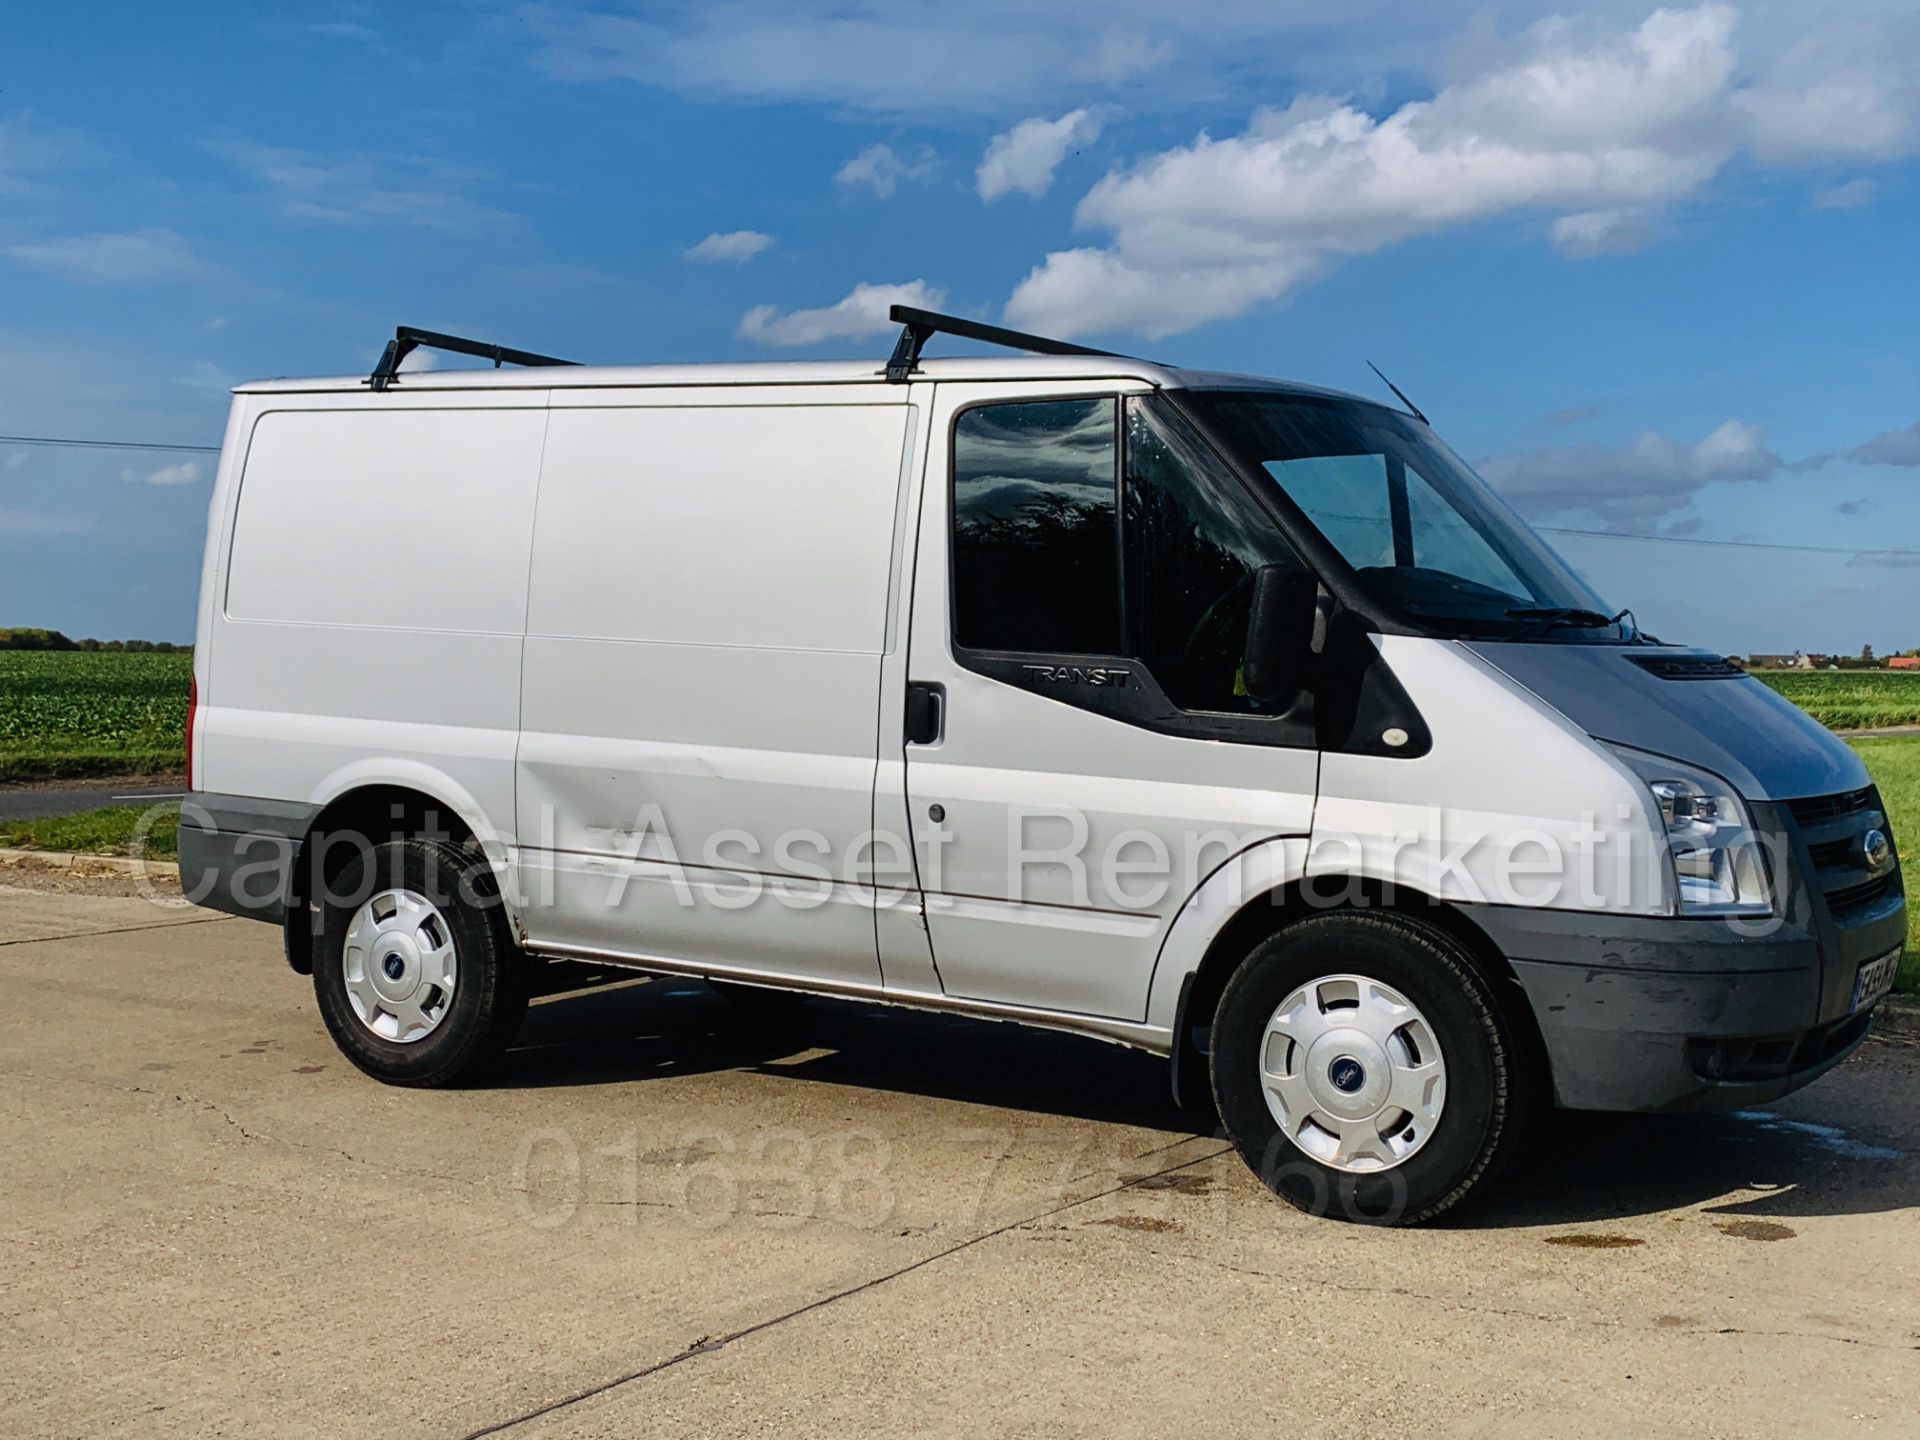 FORD TRANSIT 115 T280 SWB (2010 MODEL) '2.2 TDCI - ECO-NETIC - 115 BHP - 6 SPEED' **AIR CON** - Image 9 of 32